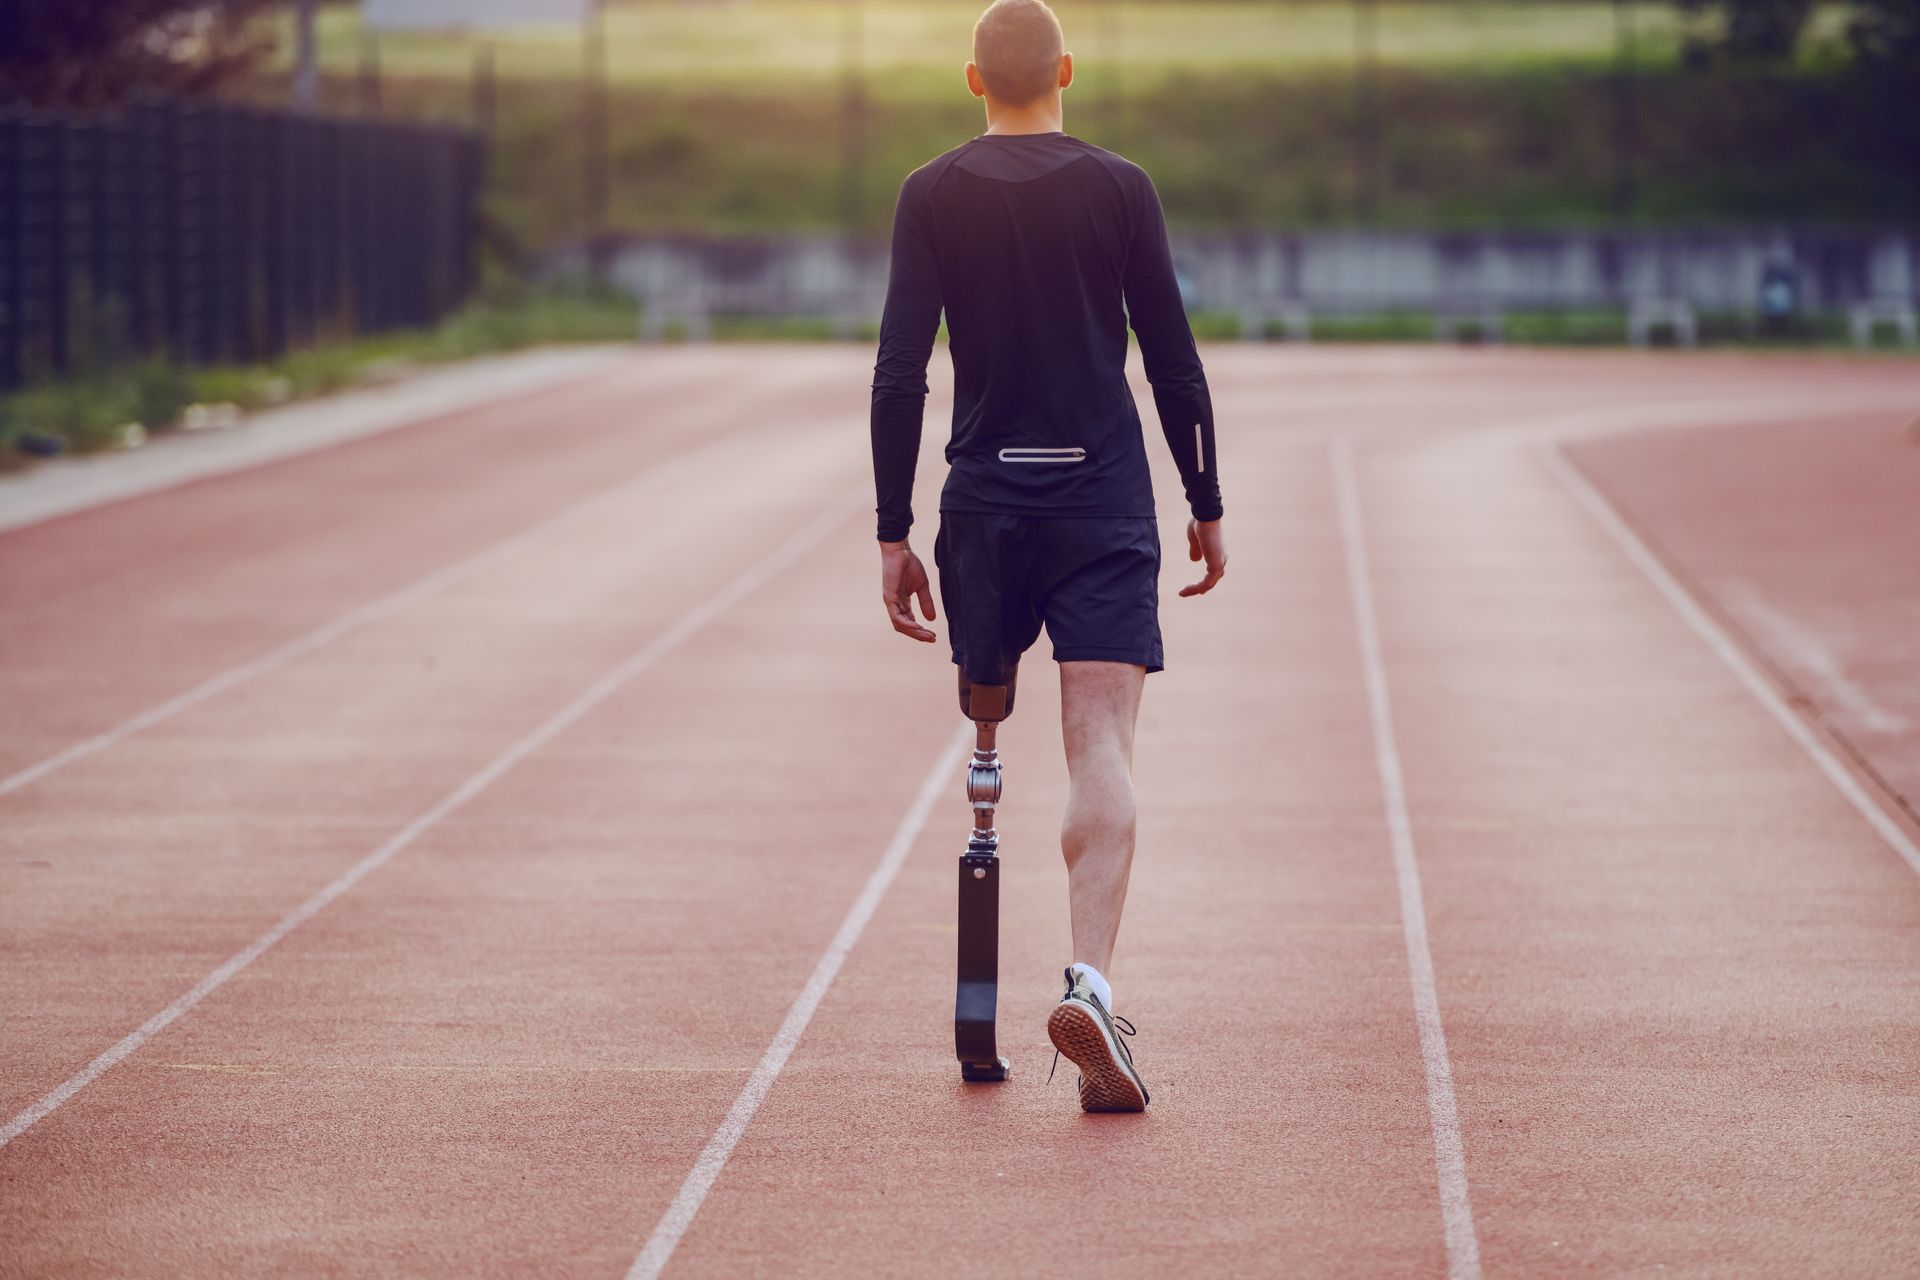 An athletic man with a prosthetic running leg prepares to run on a marathon track.